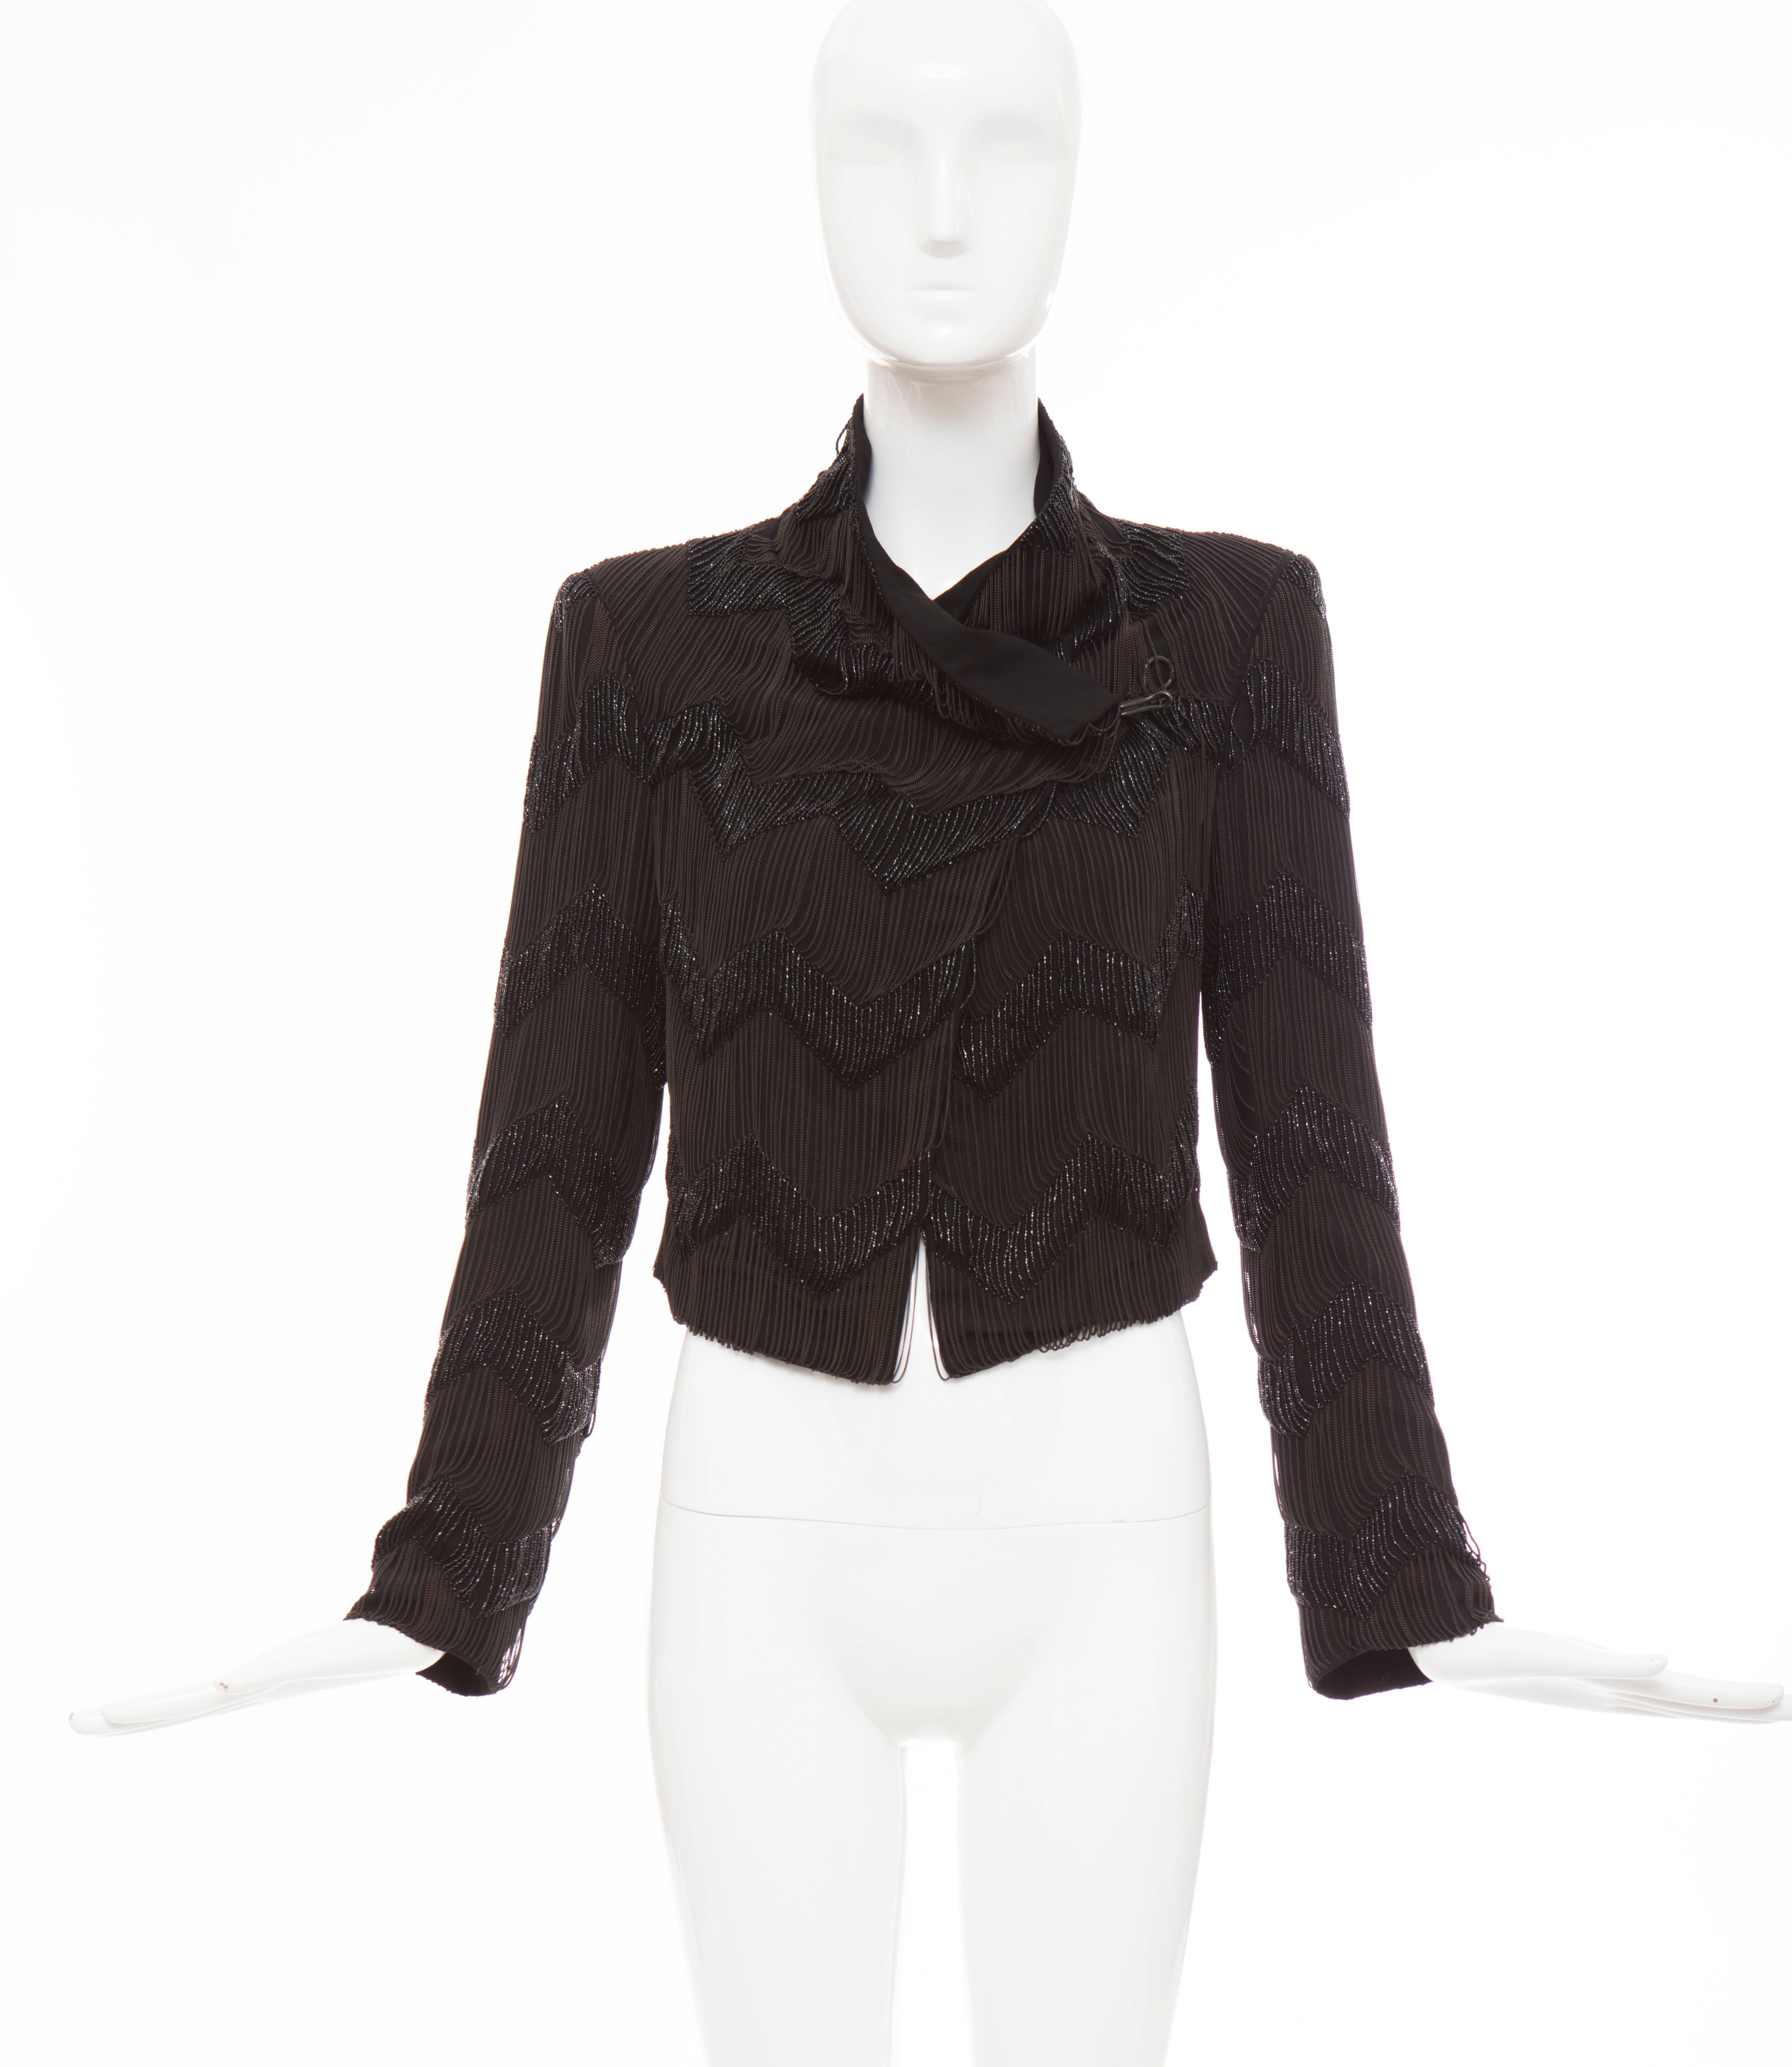  Ann Demeulemeester, Fall 2011 runway black wool chain-link and beaded jacket with hook closure at front and fully lined.

Retail: $5165

IT. 36
US. 4

Bust: 34, Waist 31, Shoulder 15, Sleeve 23, Length 21
